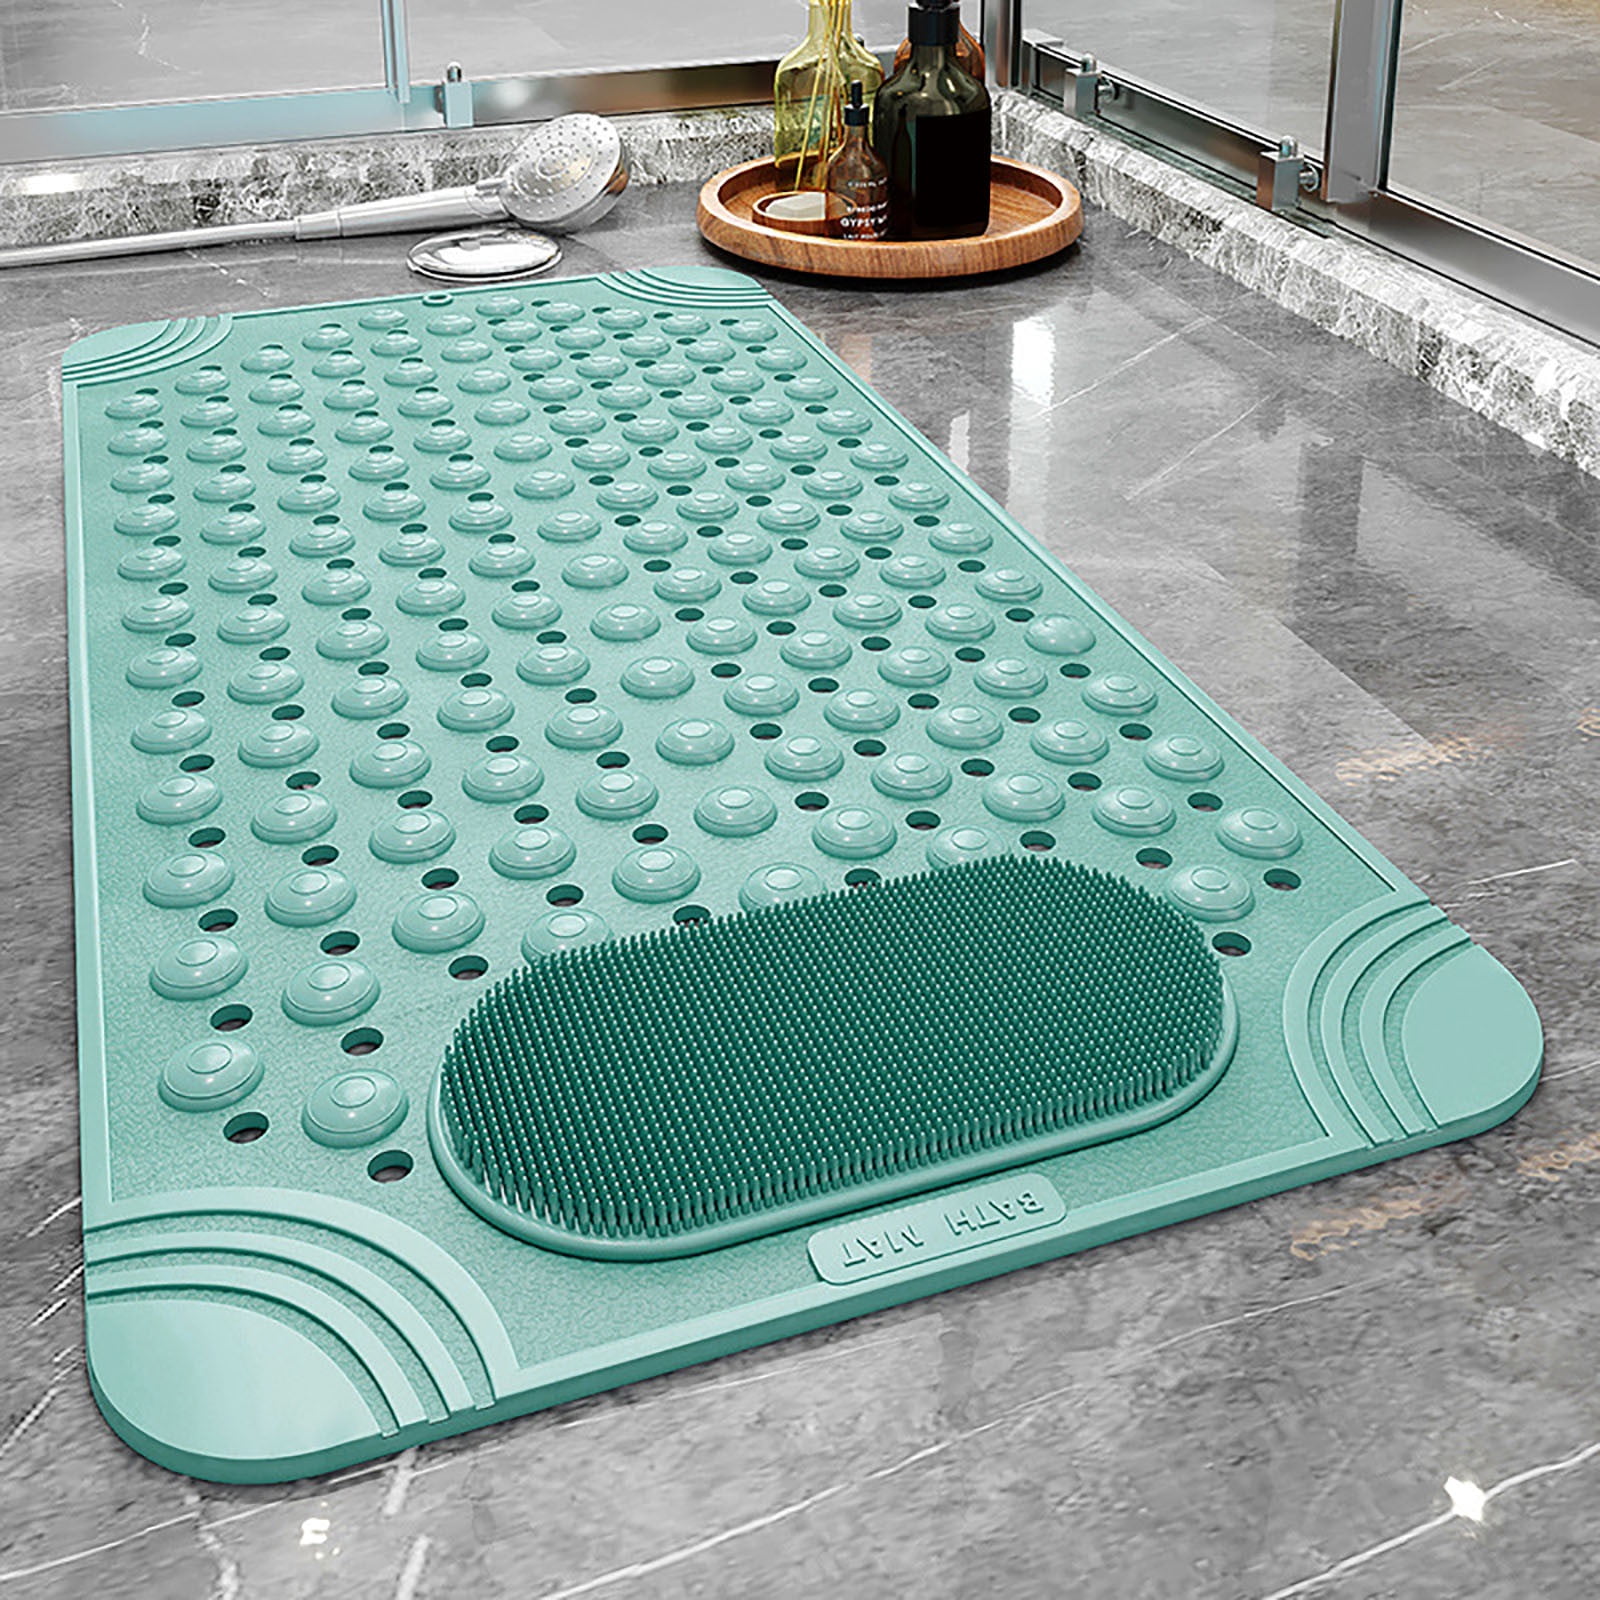 Pjtewawe bathroom products foot scrubber shower mat with pumice feet scrub stone  bathtub mat with antislip suction cups and drain holes non slip bath mat  with a pumice stone for feet massage 